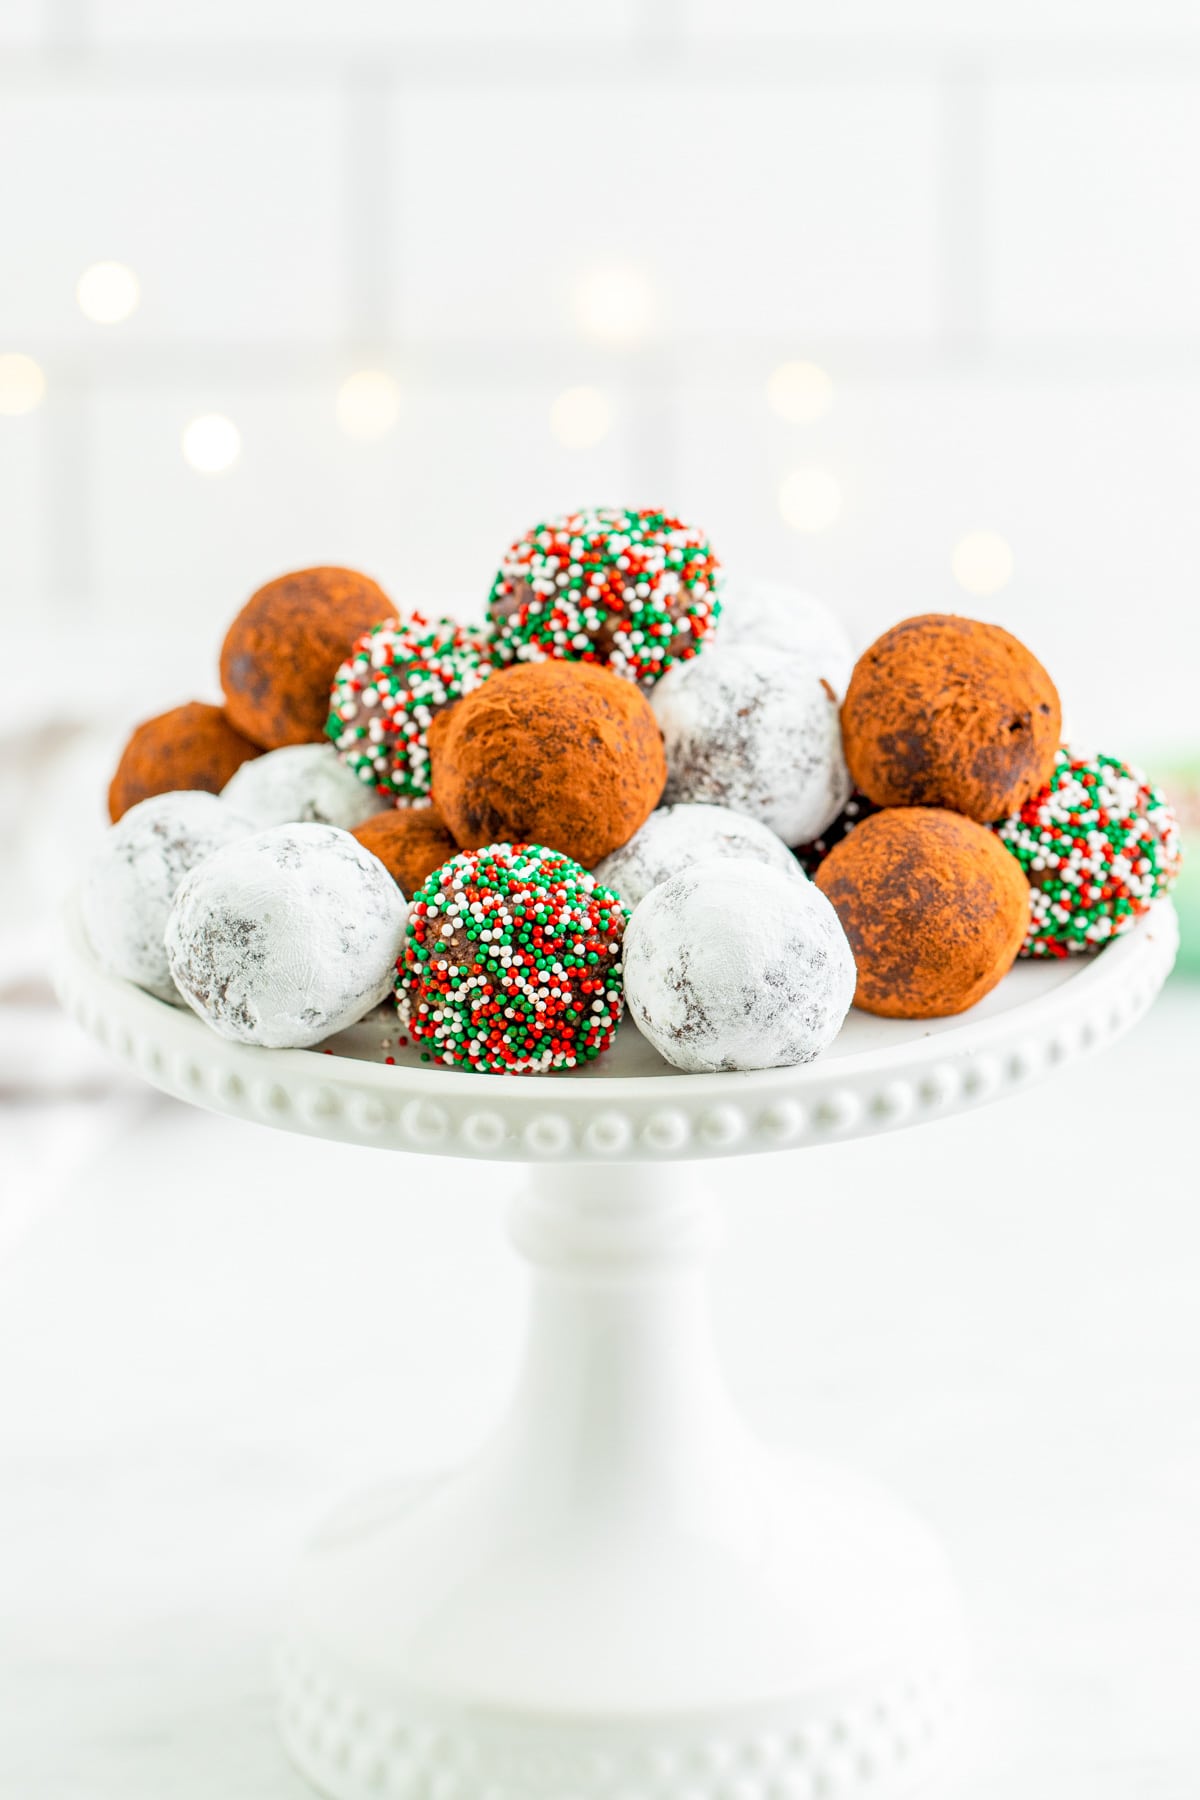 Finished Rum Balls on a white cake stand all rolled in different ingredients.